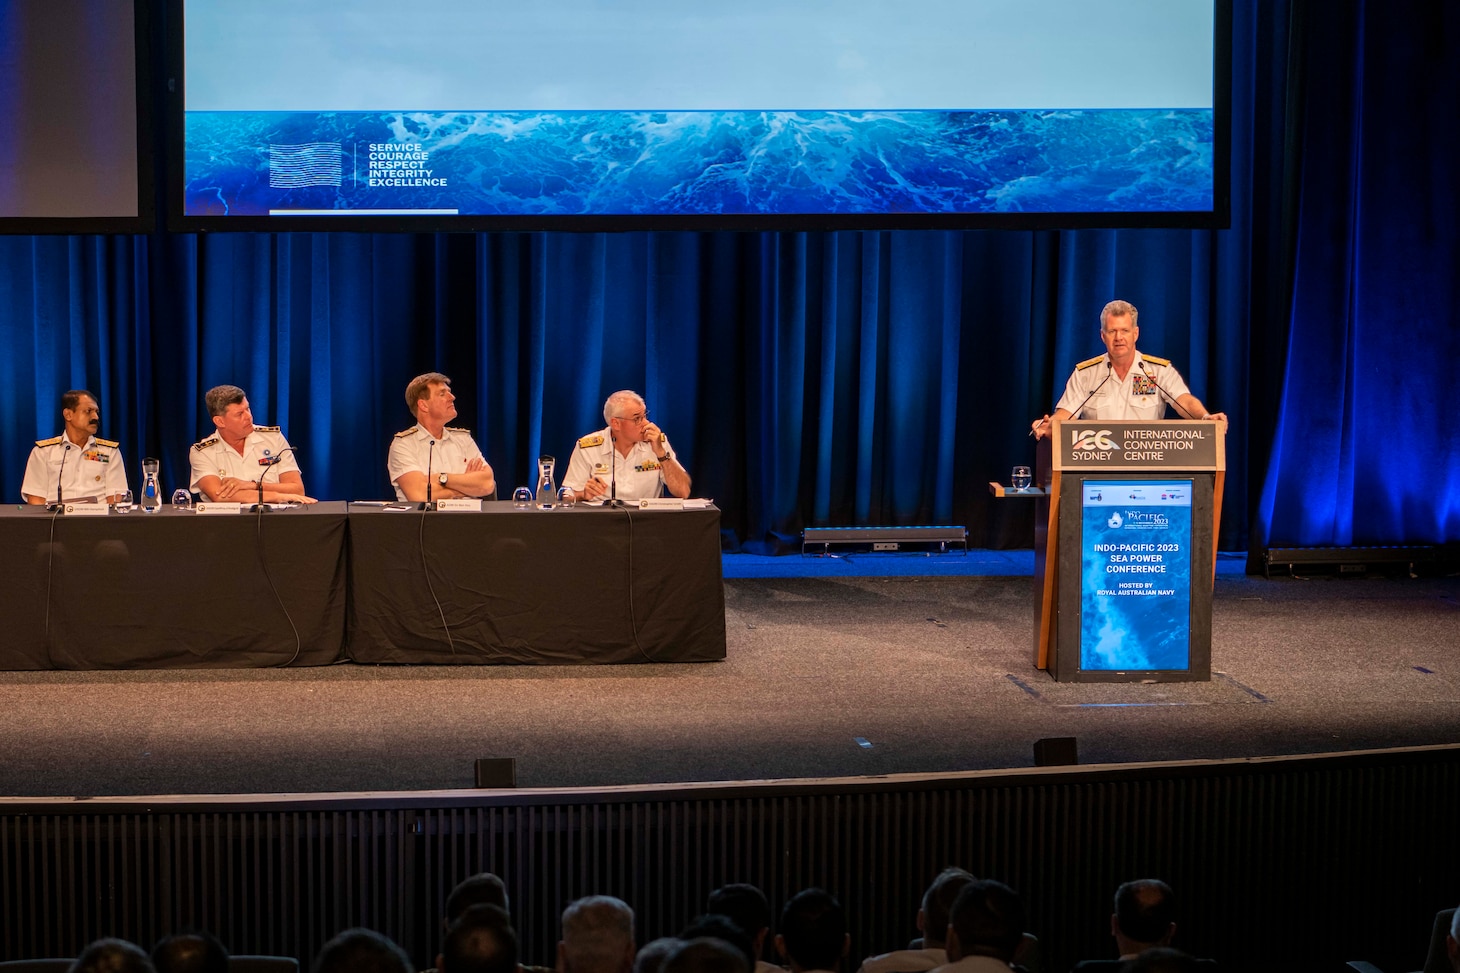 Adm. Samuel Paparo, commander, U.S. Pacific Fleet, right, delivers remarks during a panel discussion of senior naval leaders from Australia, Canada, France, India, UK and the U.S. at the Indo Pacific International Maritime Exposition 2023 in Sydney, Nov. 8. IP23 emphasizes the commitment of the United States, Australia, and partner nations to a free and open Indo-Pacific region. (U.S. Navy photo by Mass Communications Specialist 2nd Class Jeremy R. Boan)